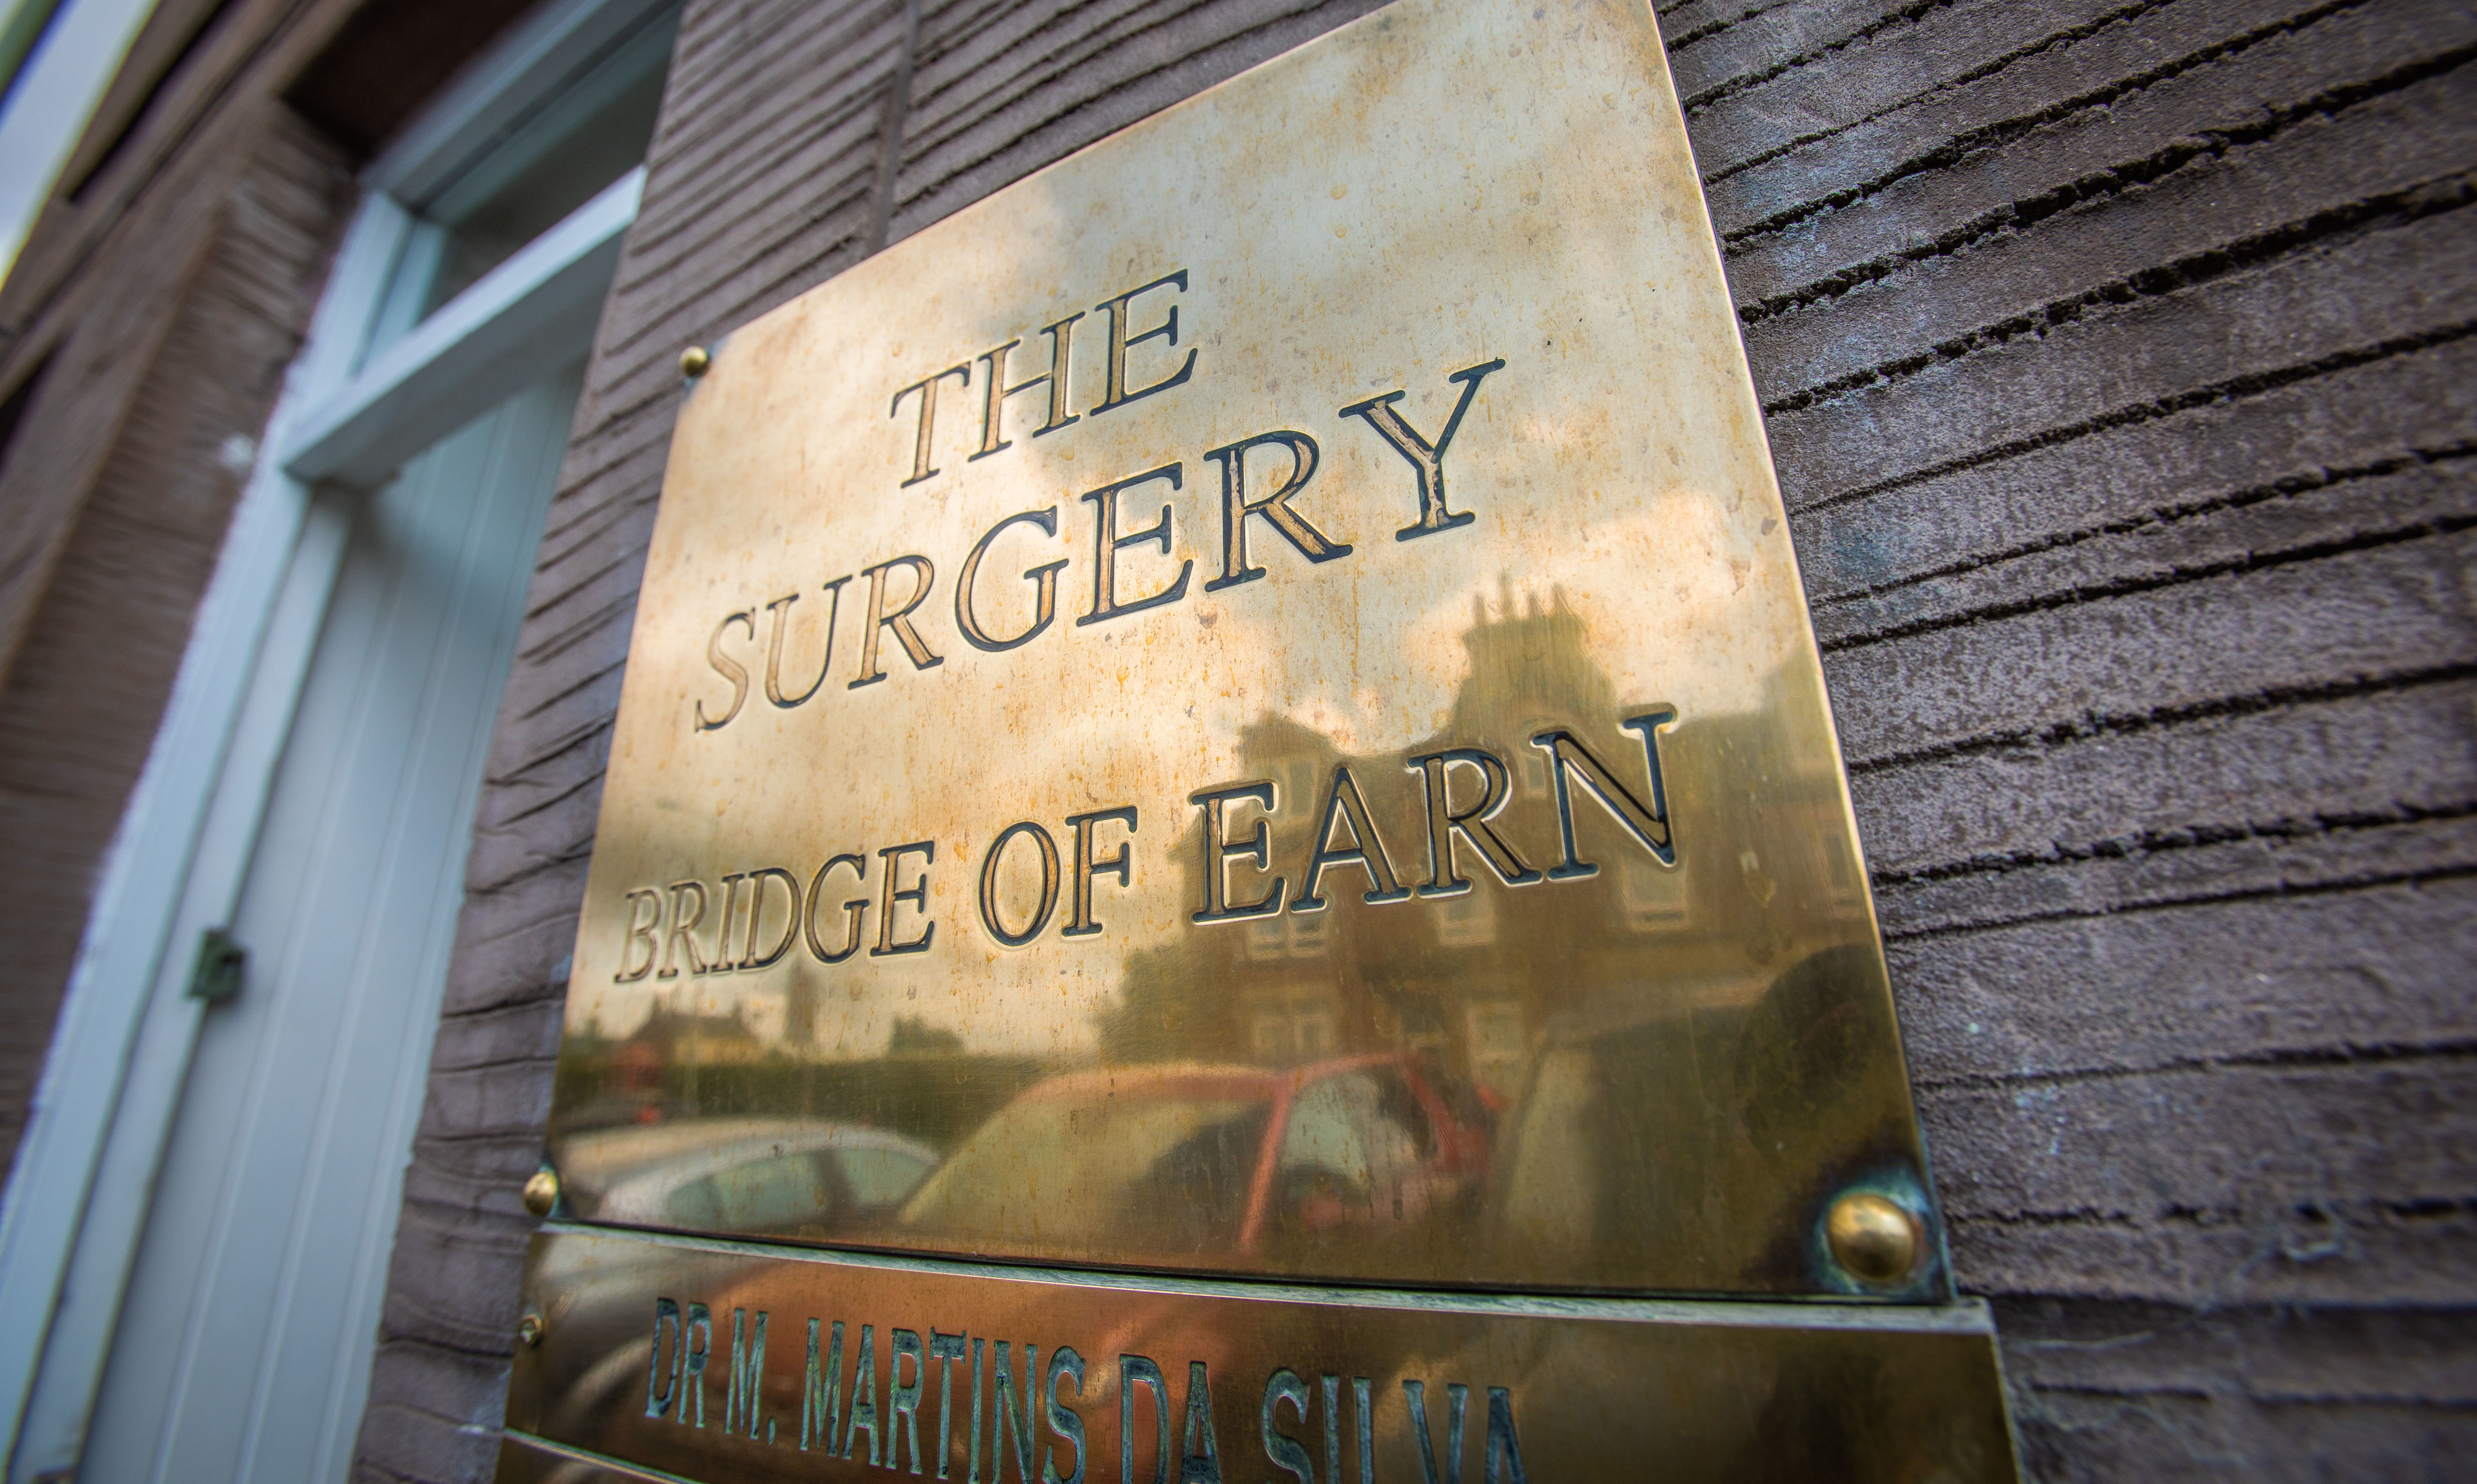 Bridge of Earn Medical Practice closed permanently on August 30.